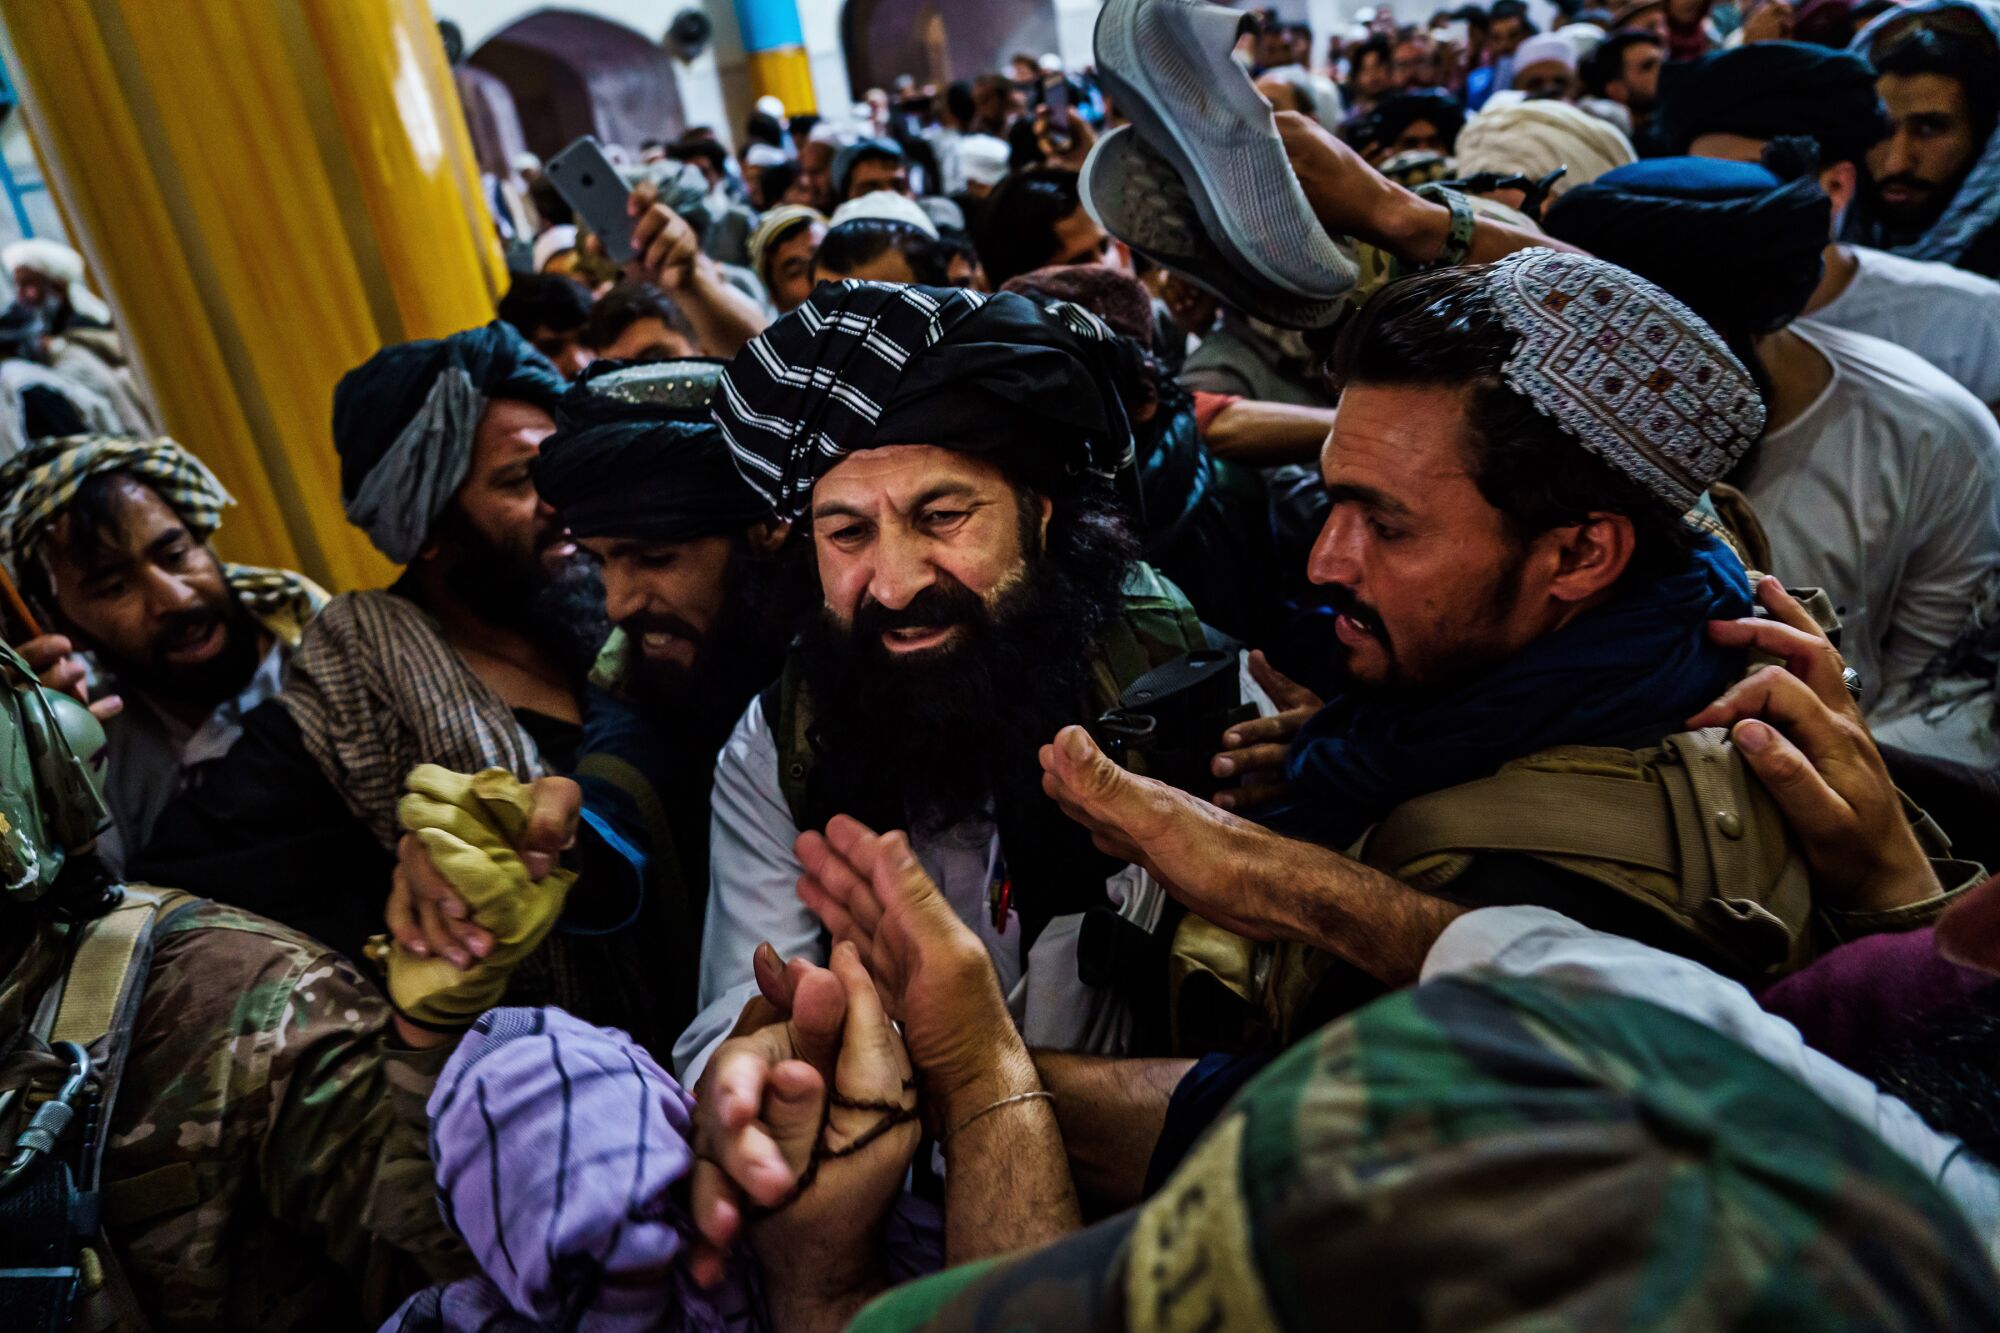 Hands reach out from a swarm of people surrounding a bearded smiling man moving through the crowd.